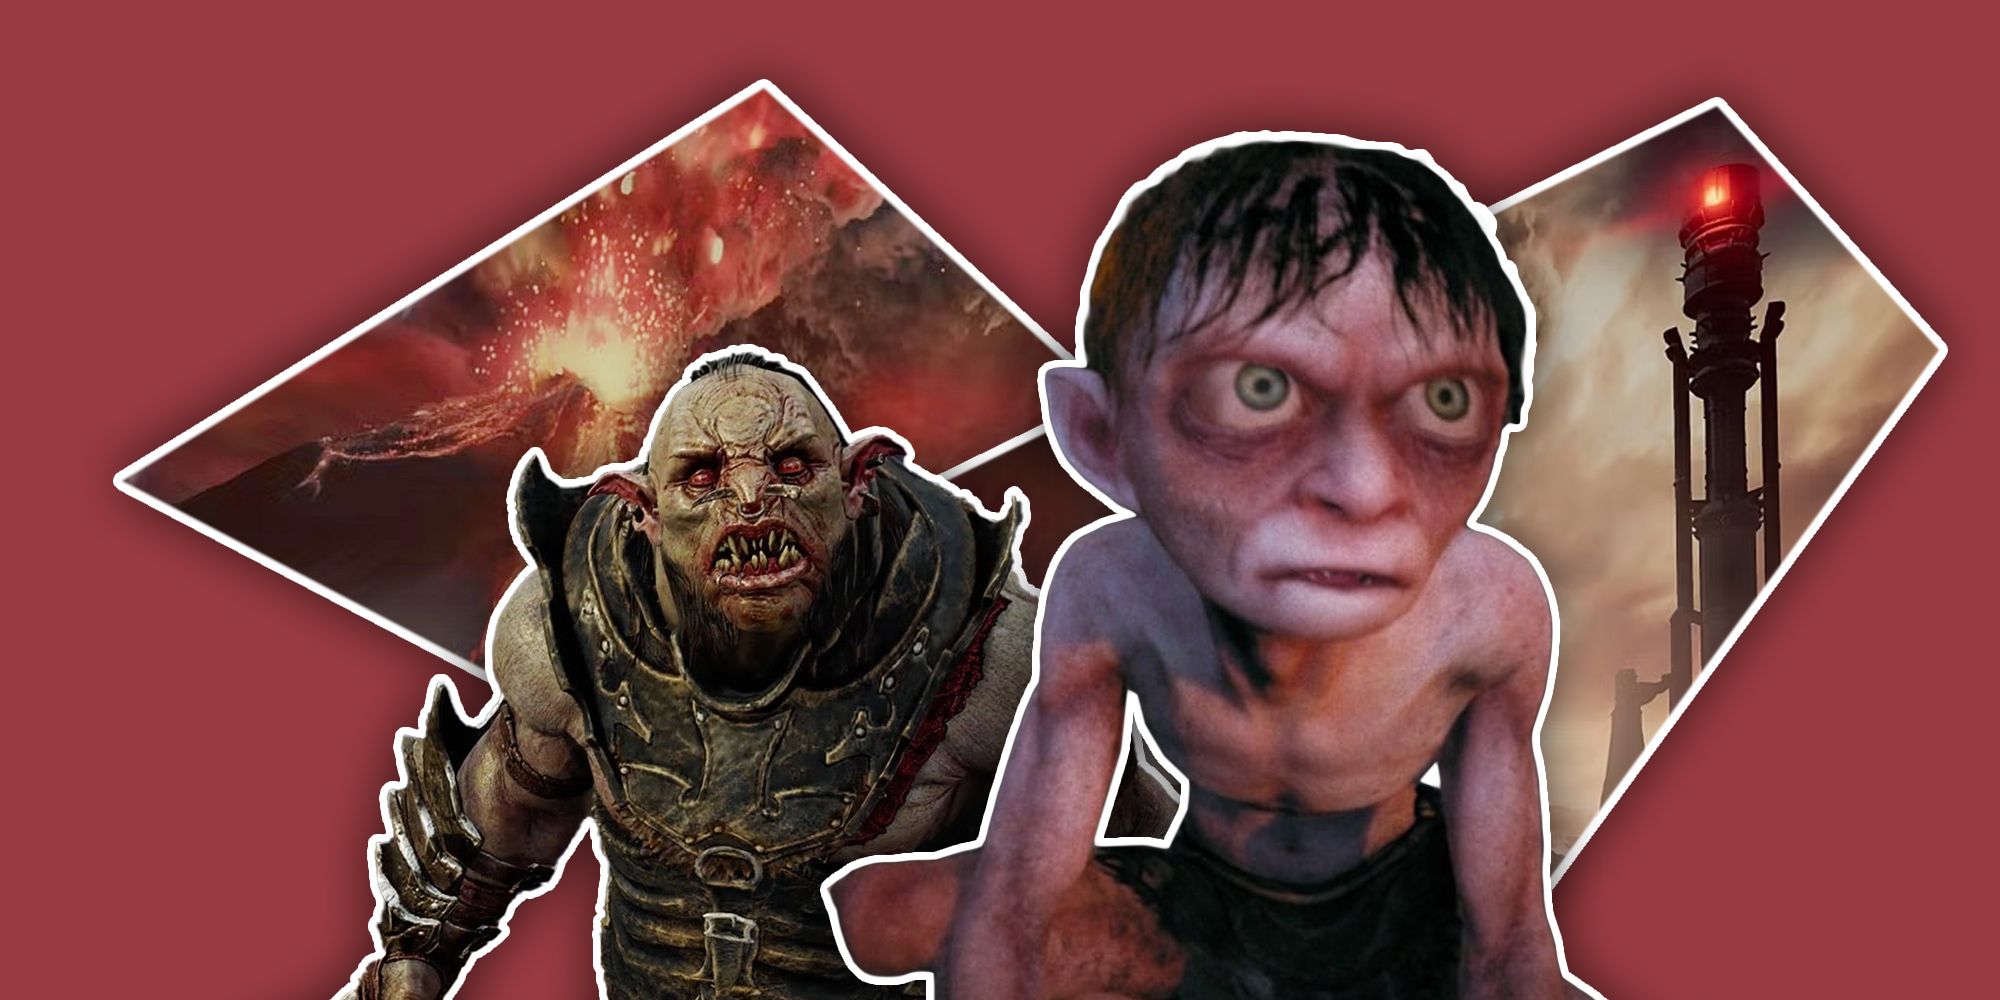 An orc and Gollum against a backdrop with images of Mordor